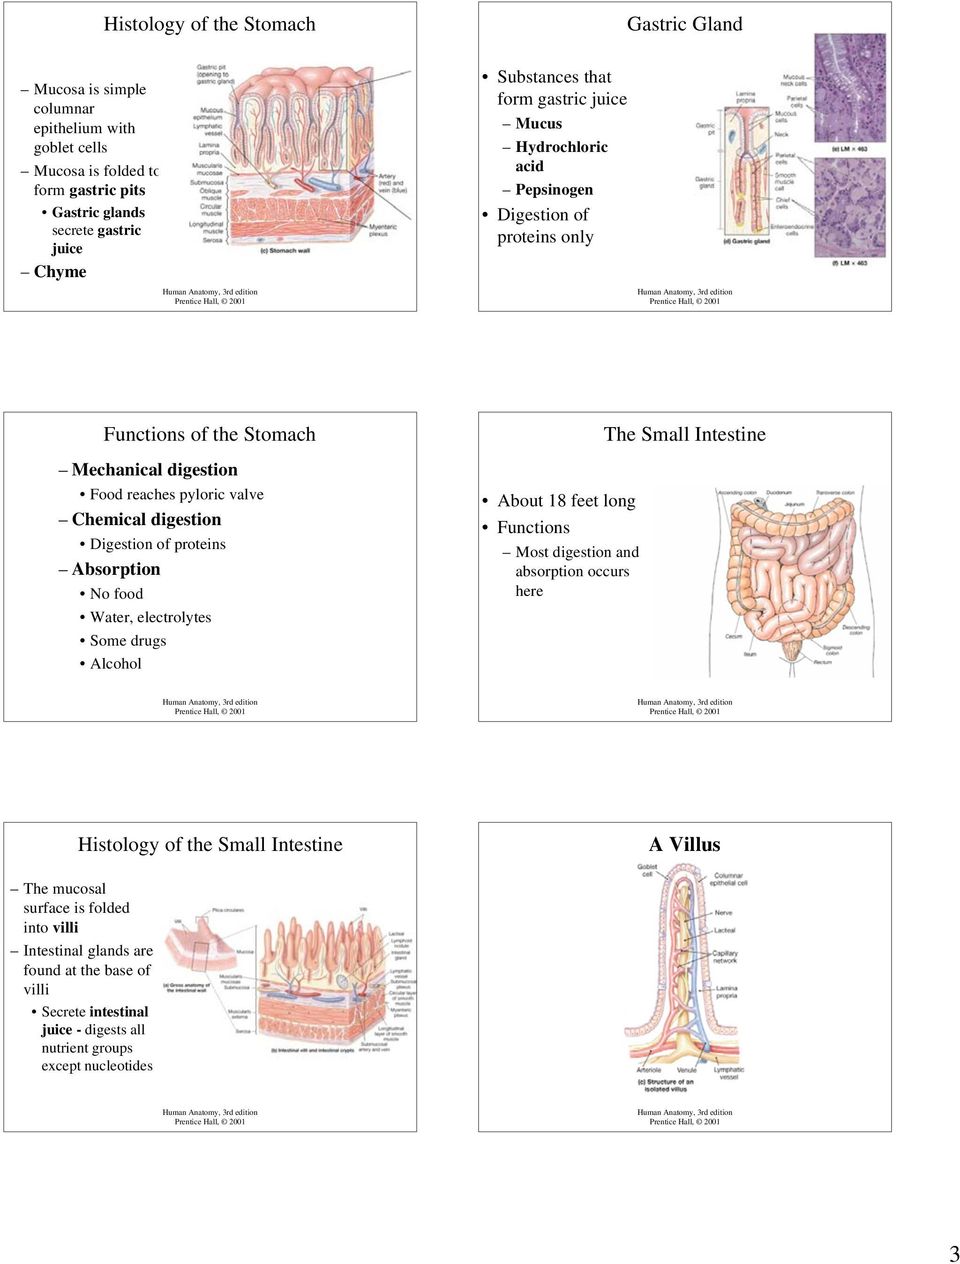 Digestion of proteins Absorption No food Water, electrolytes Some drugs Alcohol About 18 feet long Functions Most digestion and absorption occurs here The Small Intestine Histology of